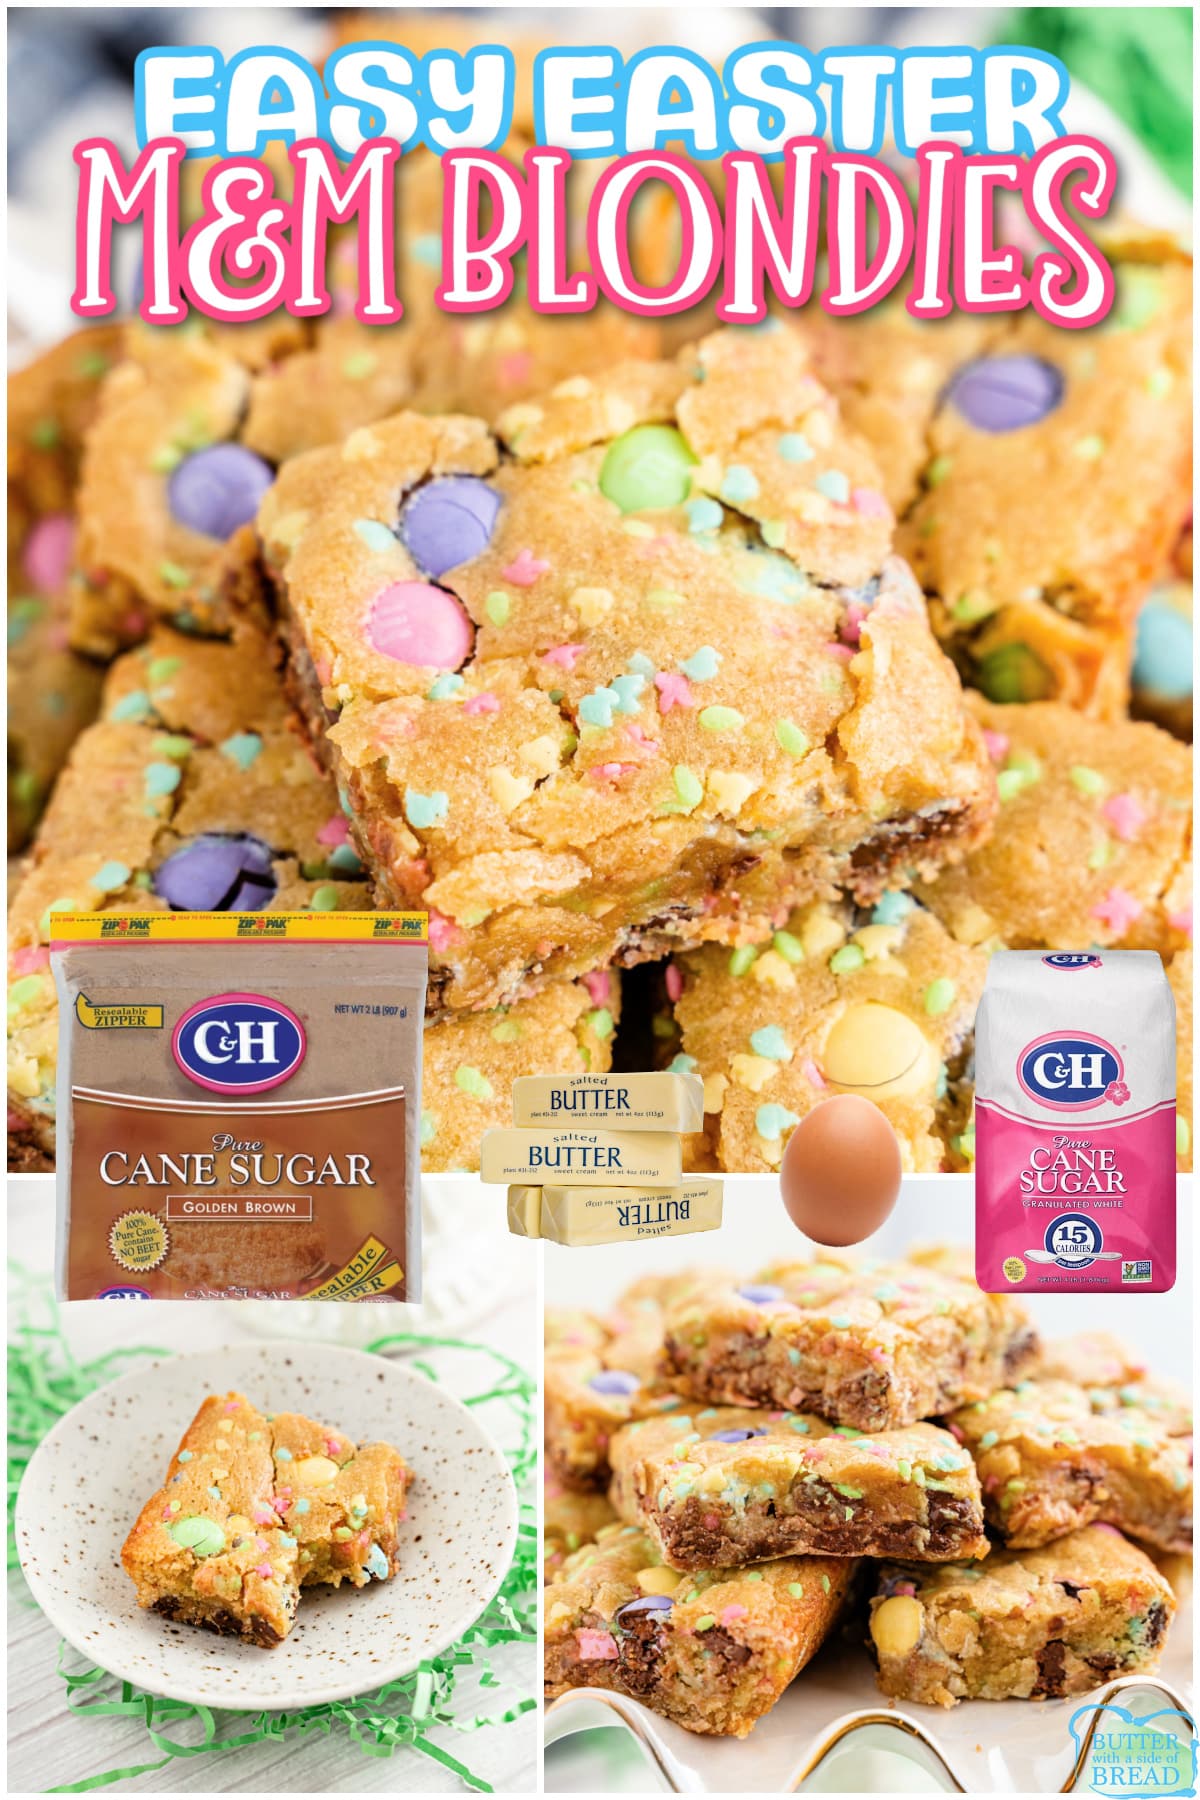 Easy Easter M&M Blondies are soft, chewy and perfect for spring! Delicious homemade blondie recipe that only takes a few minutes to make. 